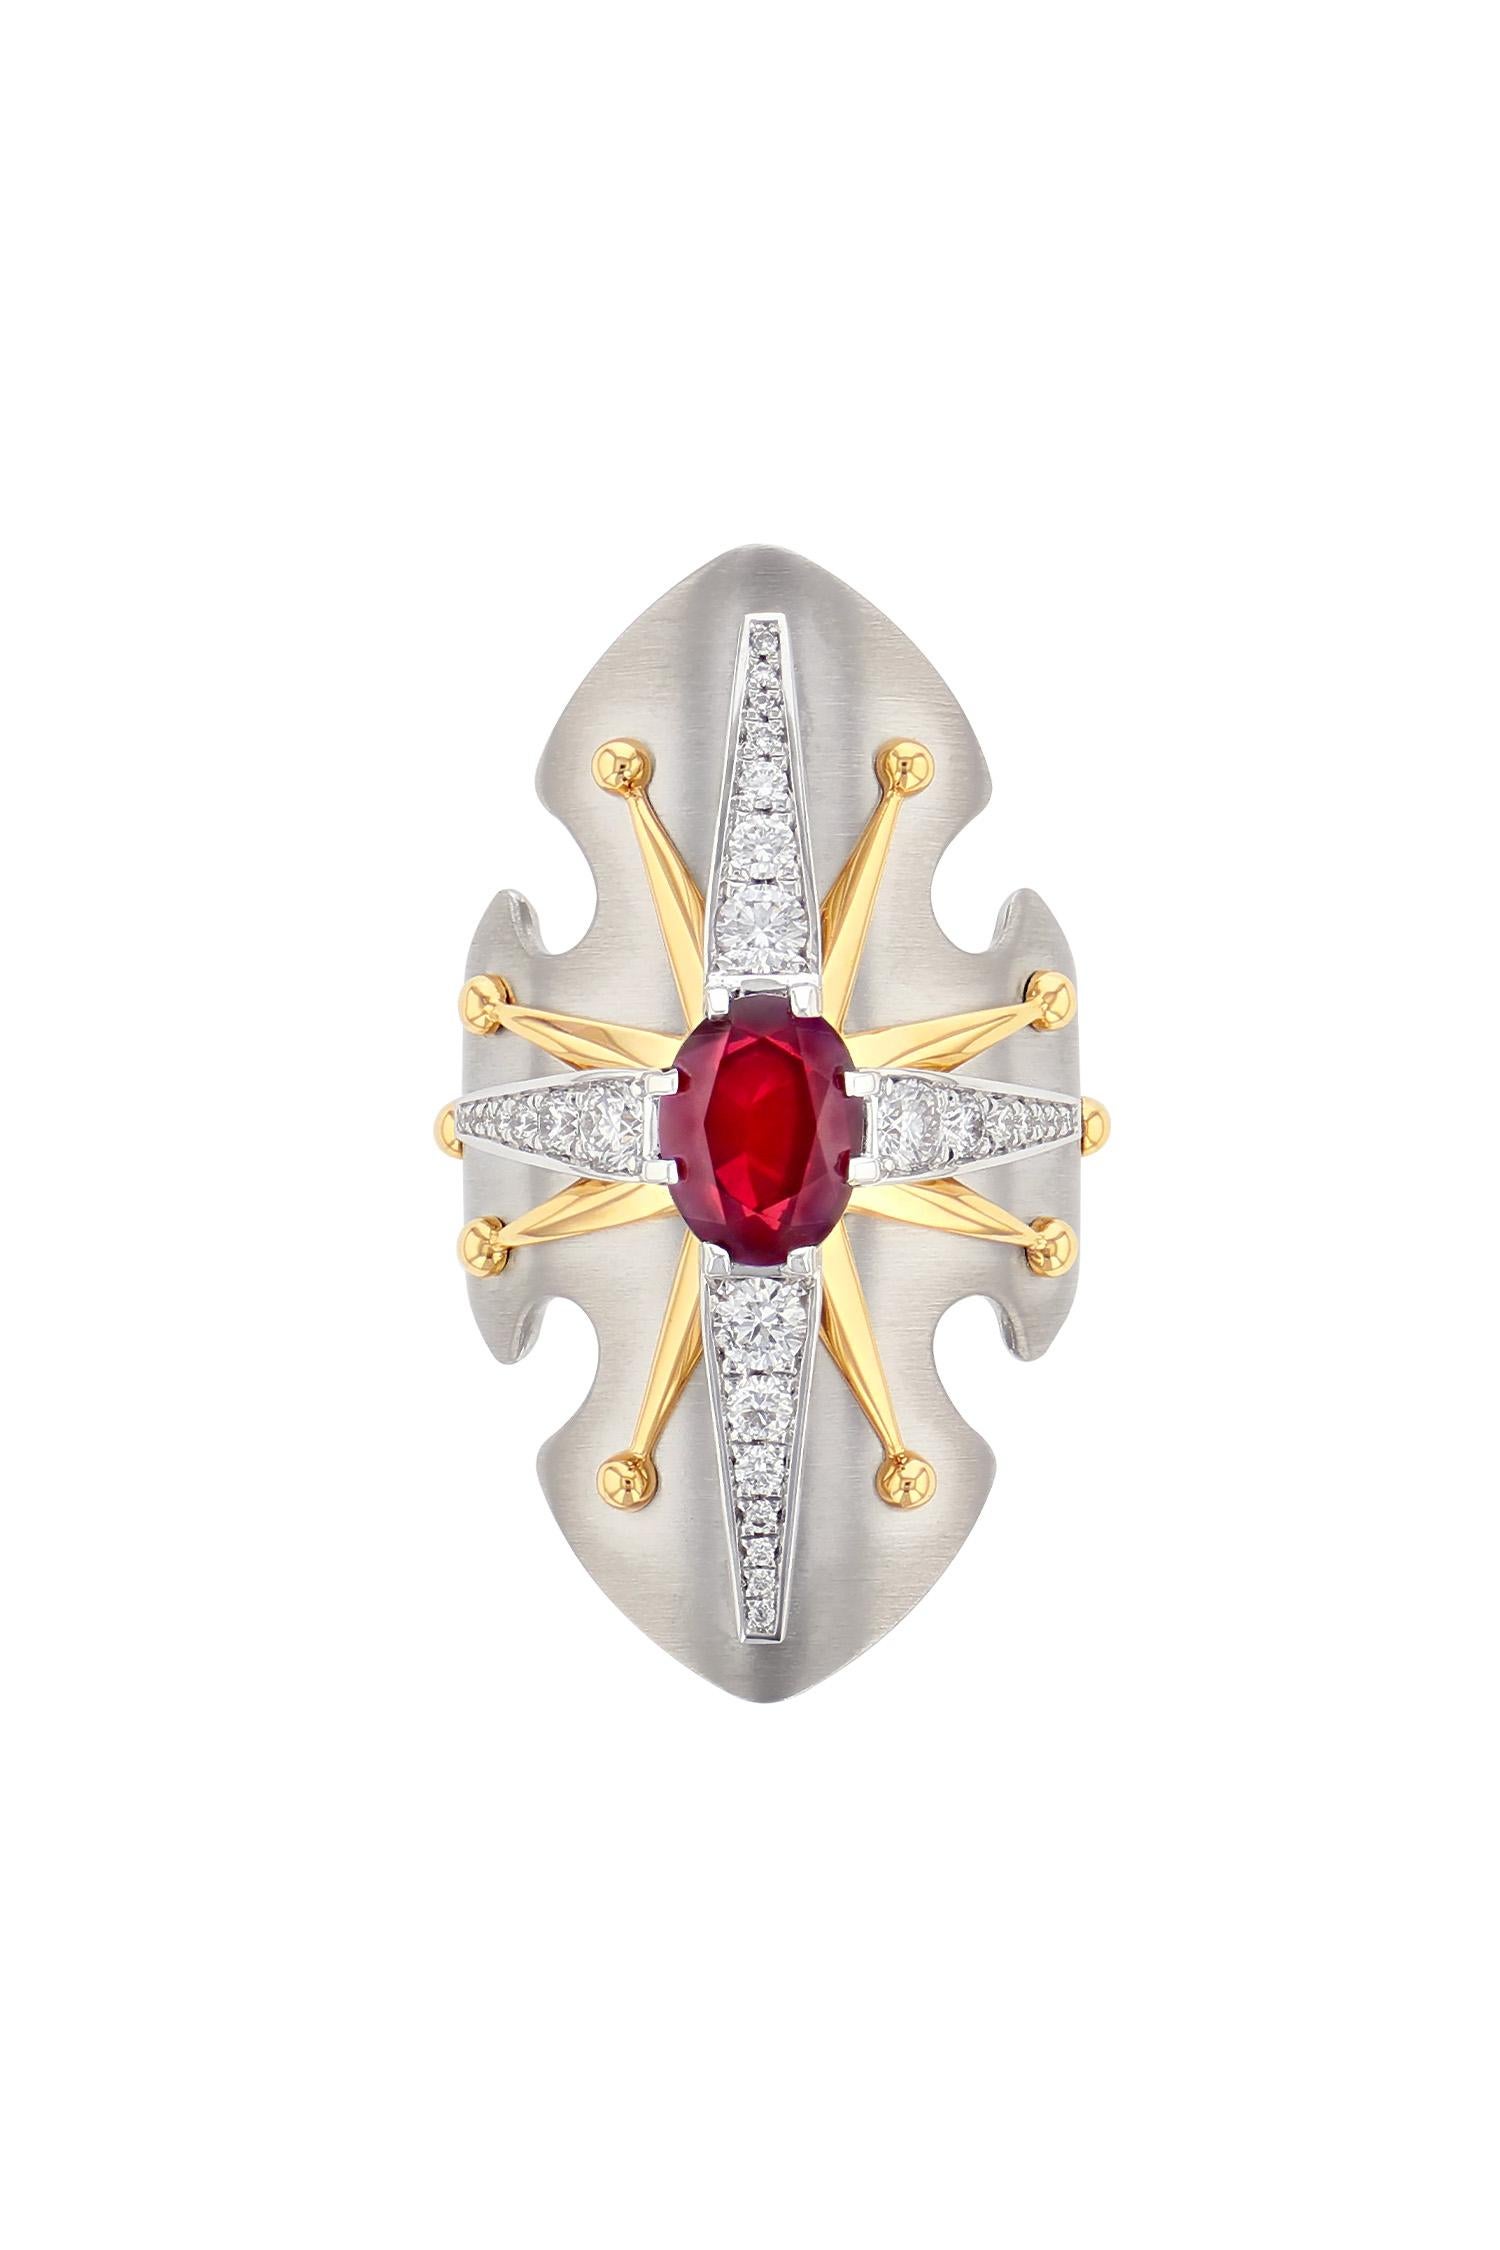 Platinum ring studded with an oval cut burmese rubis surrounded by diamonds and set on a white gold star.

Details: 
Certified Burmese Ruby: 2.46 cts  
Diamonds : 0.56 cts
18k Yellow  & Grey Gold : 4.16 g
Platinum : 16.67 g
Made in France